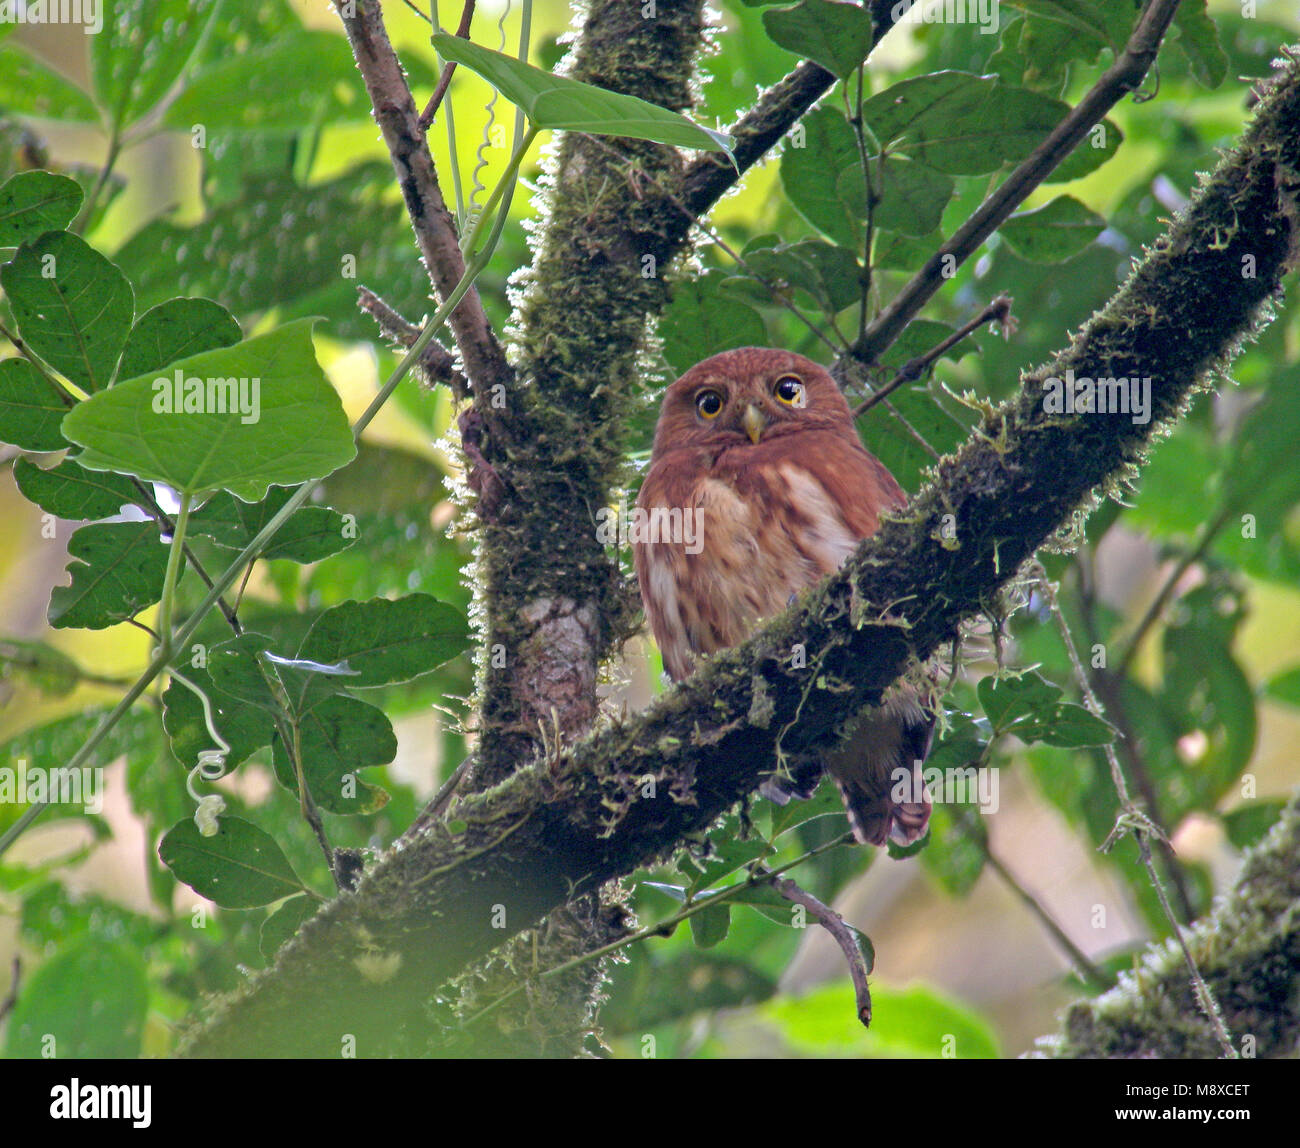 The cloud-forest pygmy owl (Glaucidium nubicola) is a short, muscular, small-sized species of owl found throughout the Andes of western Colombia and n Stock Photo